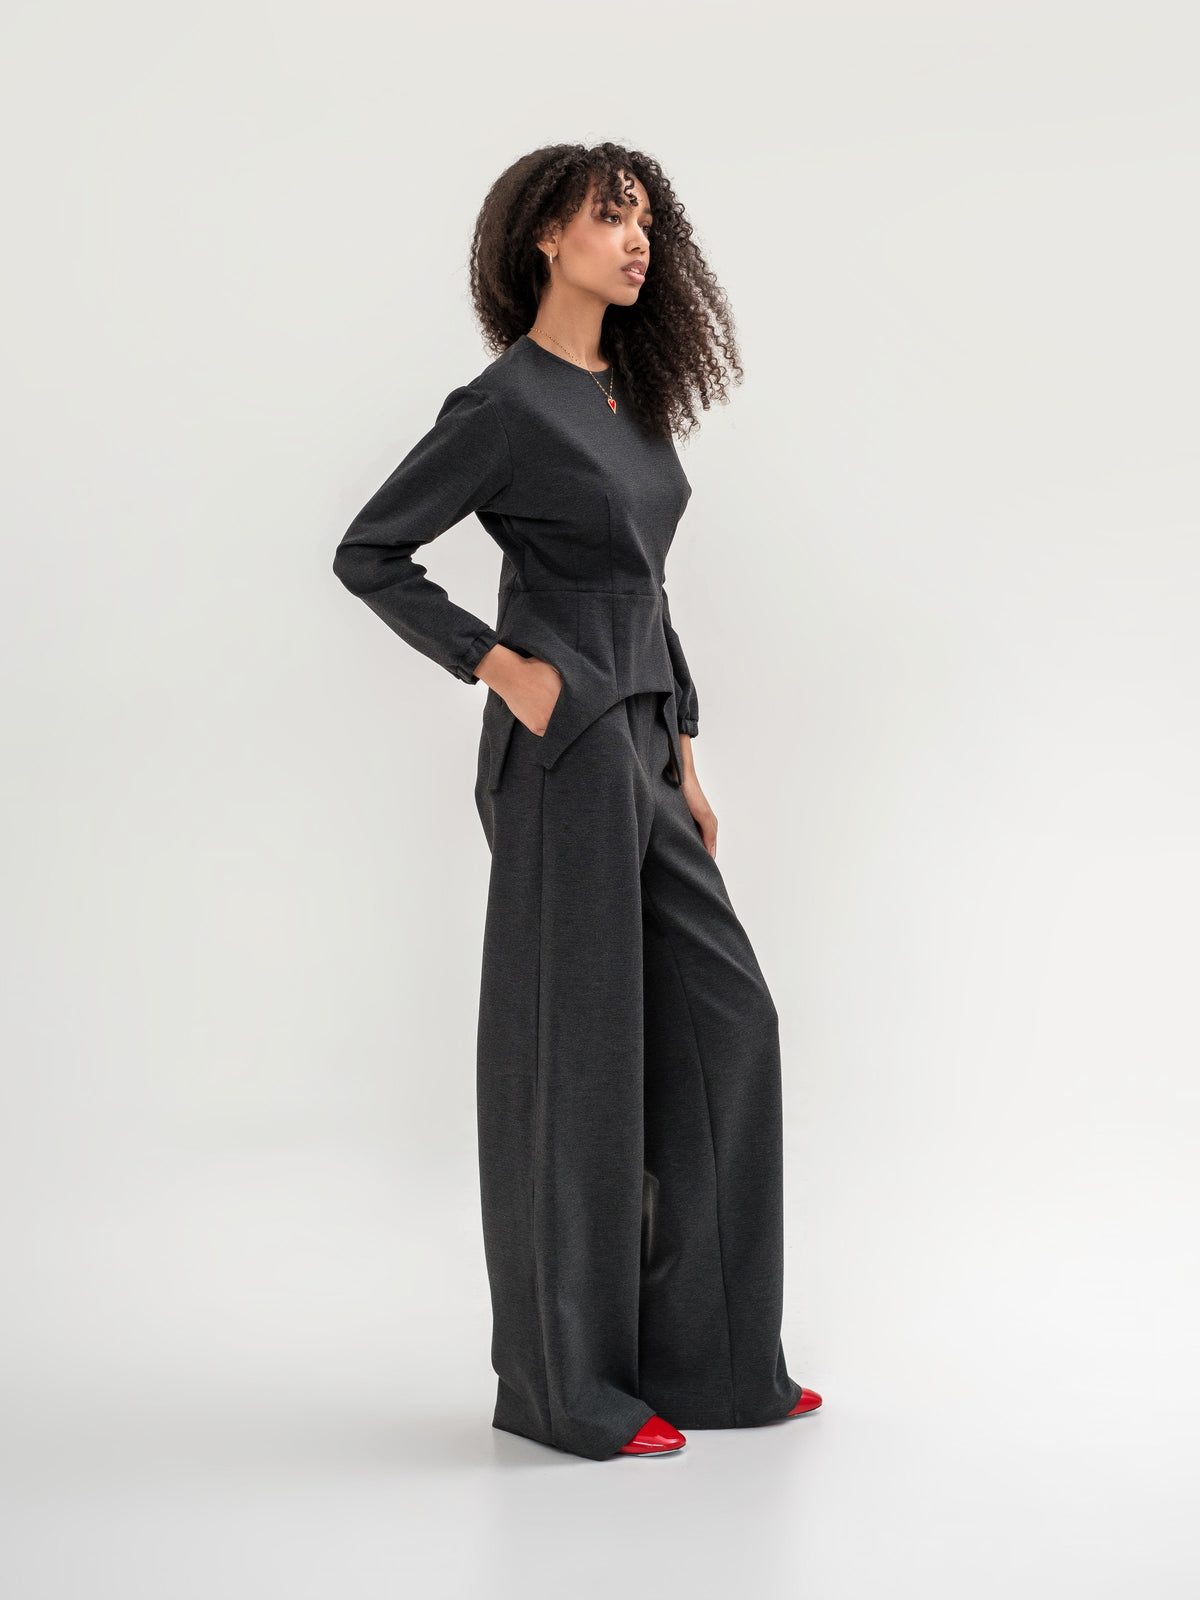 Garter inspired top with long sleeves and wide leg trousers